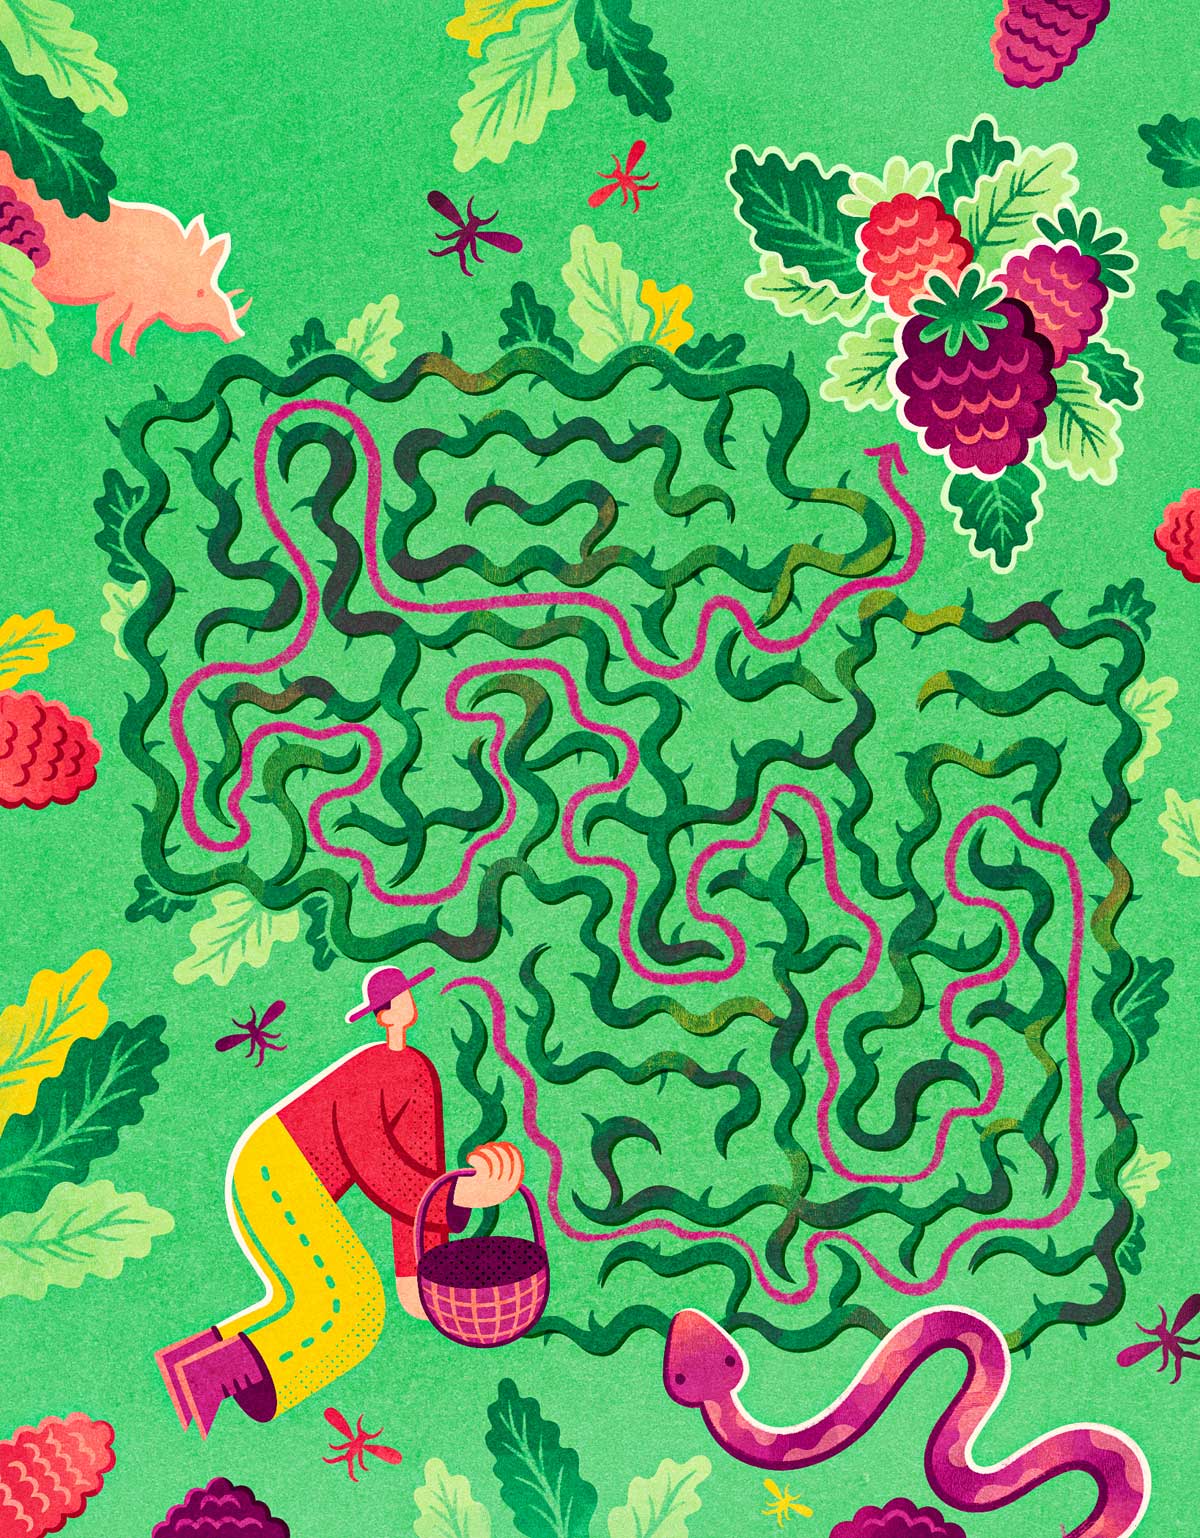 Colorful folk art style illustration with woman facing thorny vines that form a maze